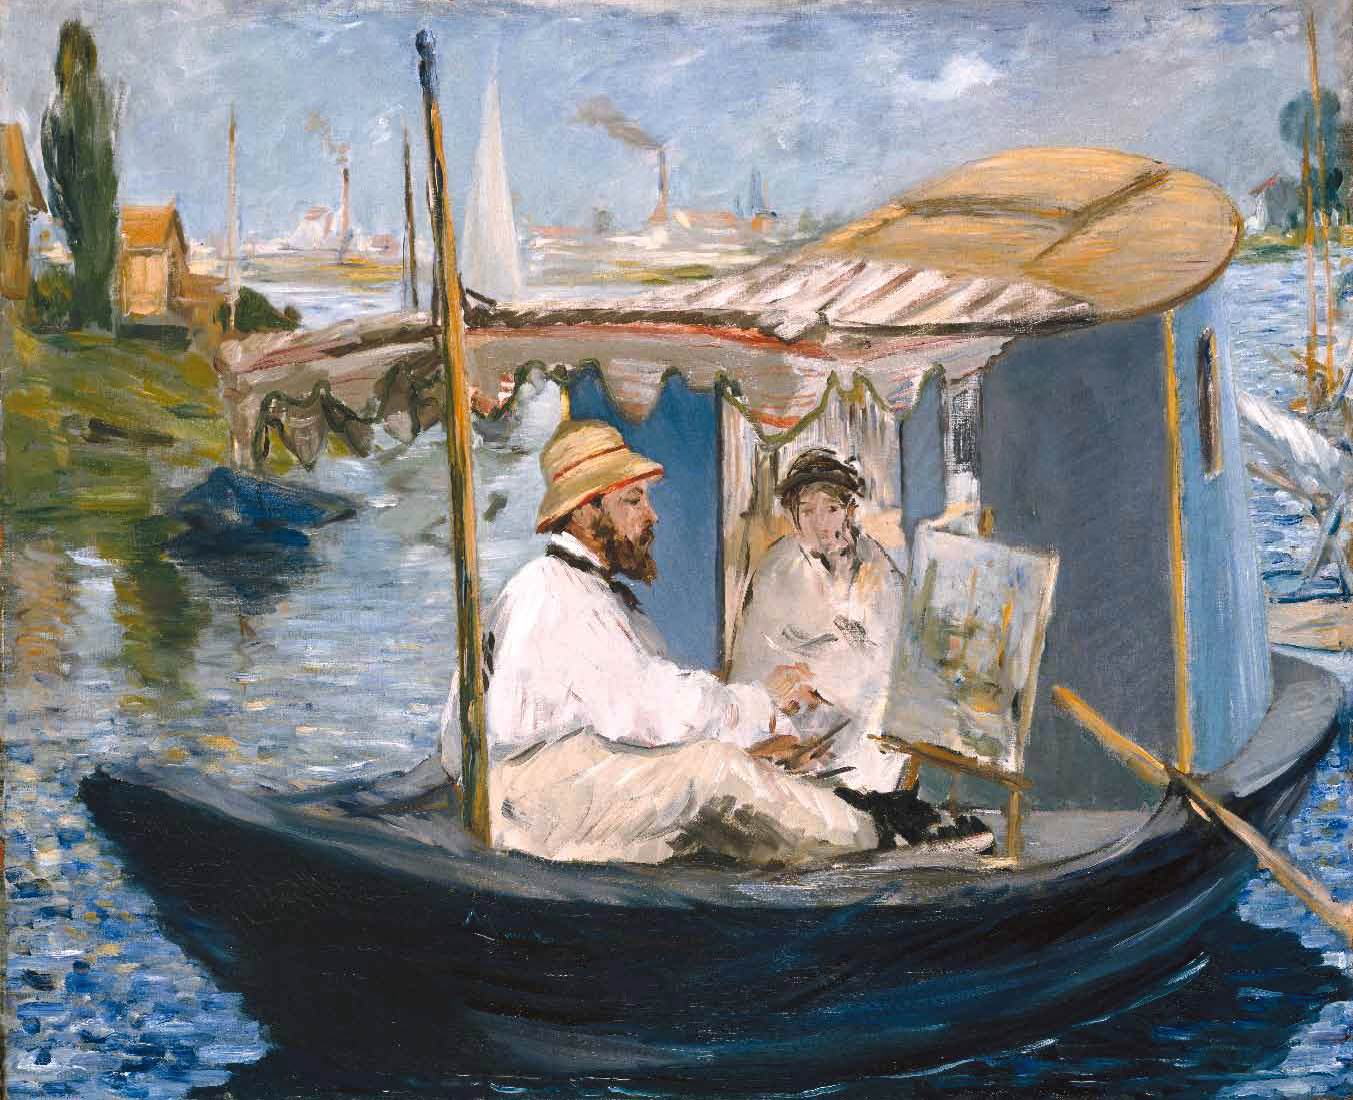 Claude Monet Painting in his Boat Studio at Argenteuil